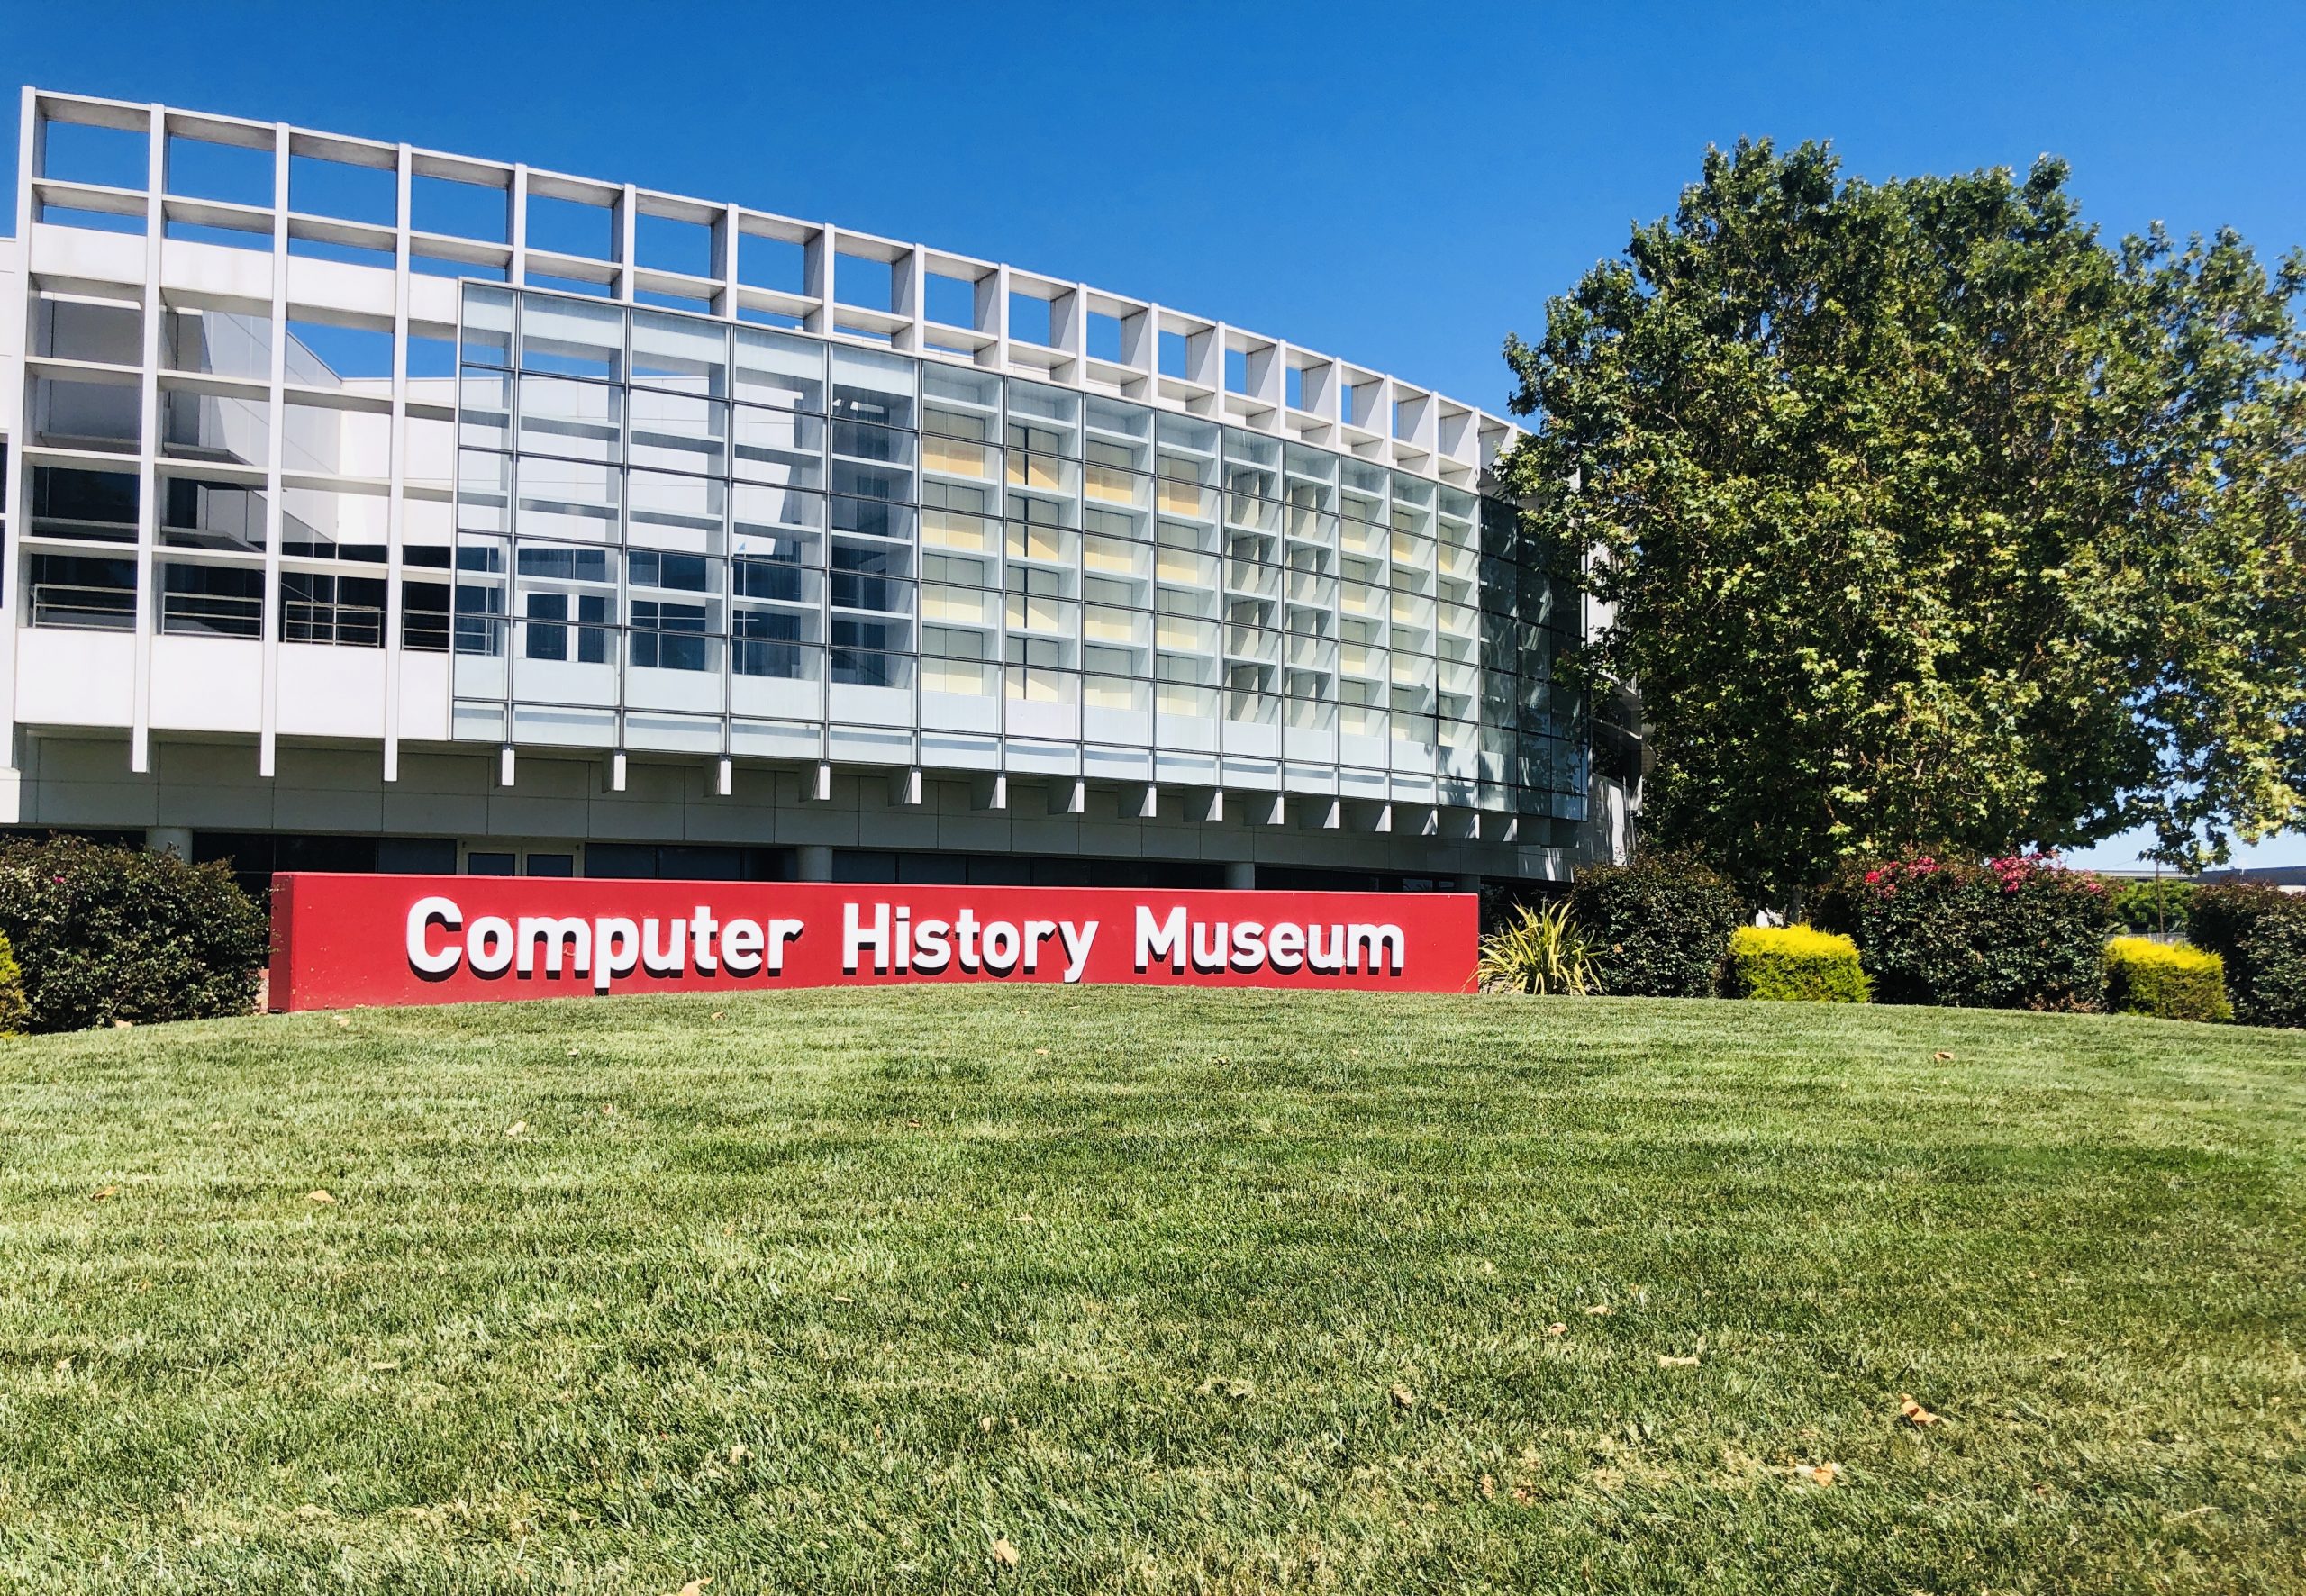 Mountain View computer history museum sign